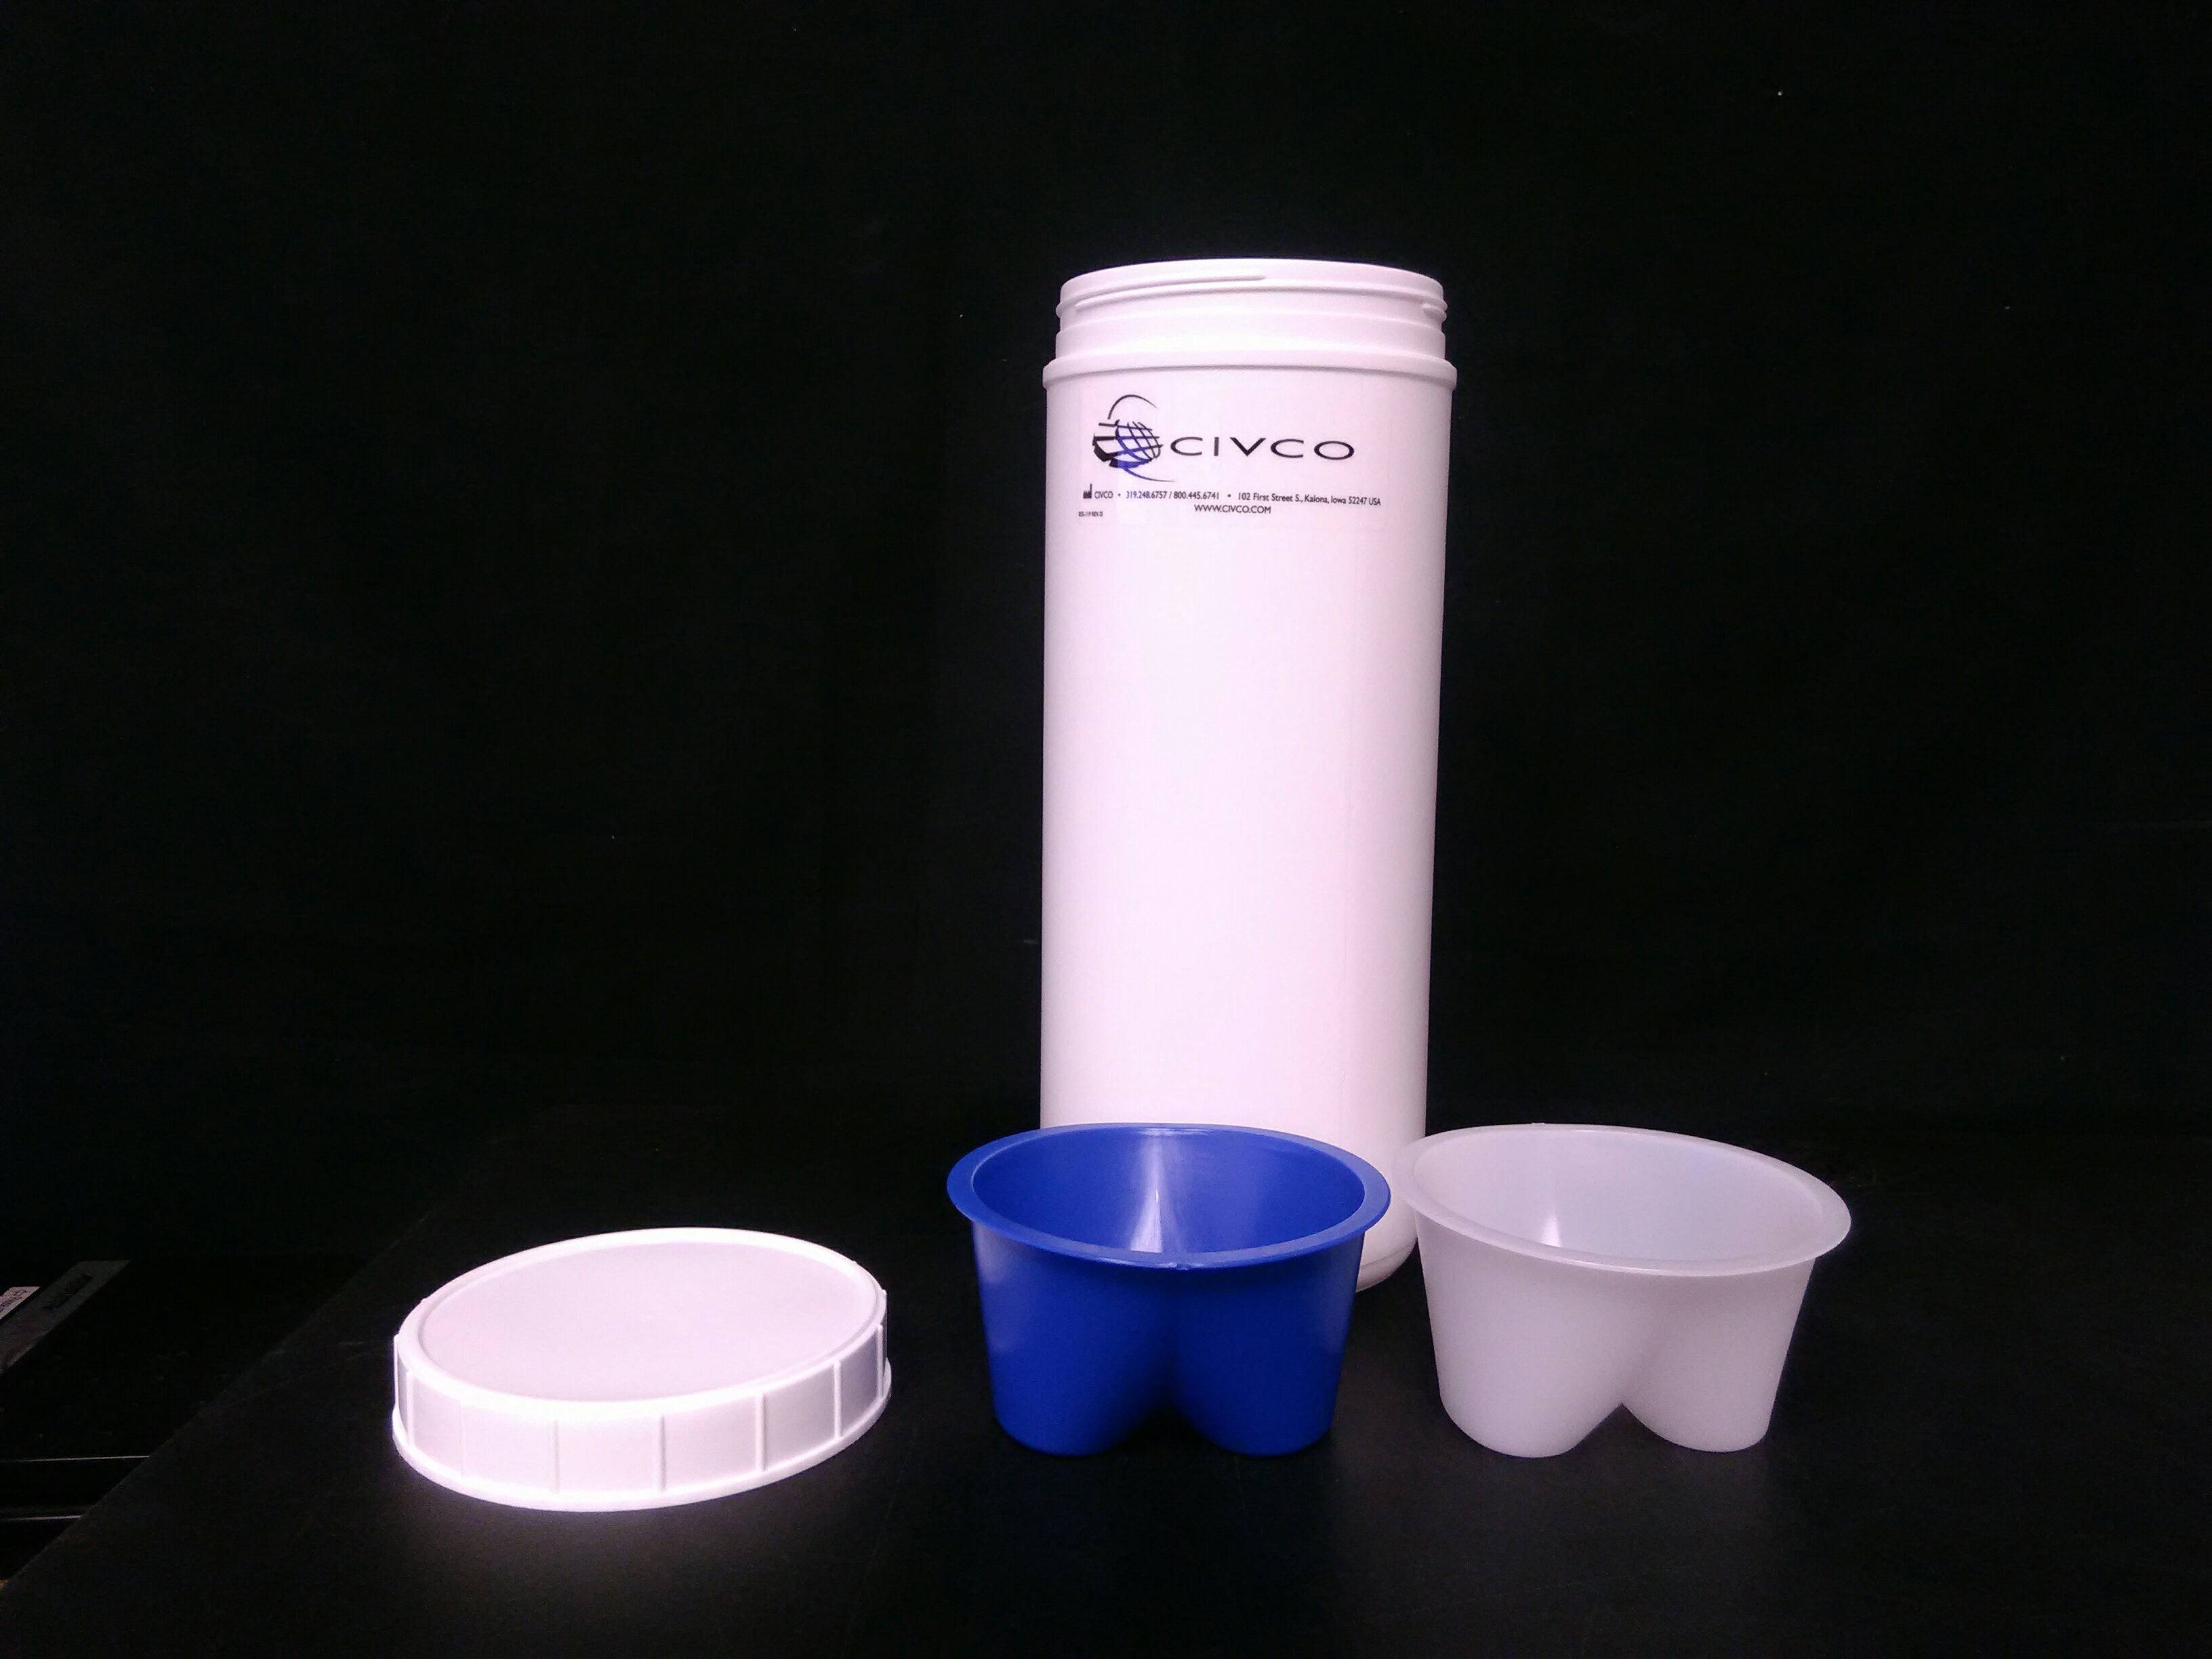 610-585 ENDOCAVITY SOAKING CUP REPLACEMENT KIT - To Your Door Medical  - kit